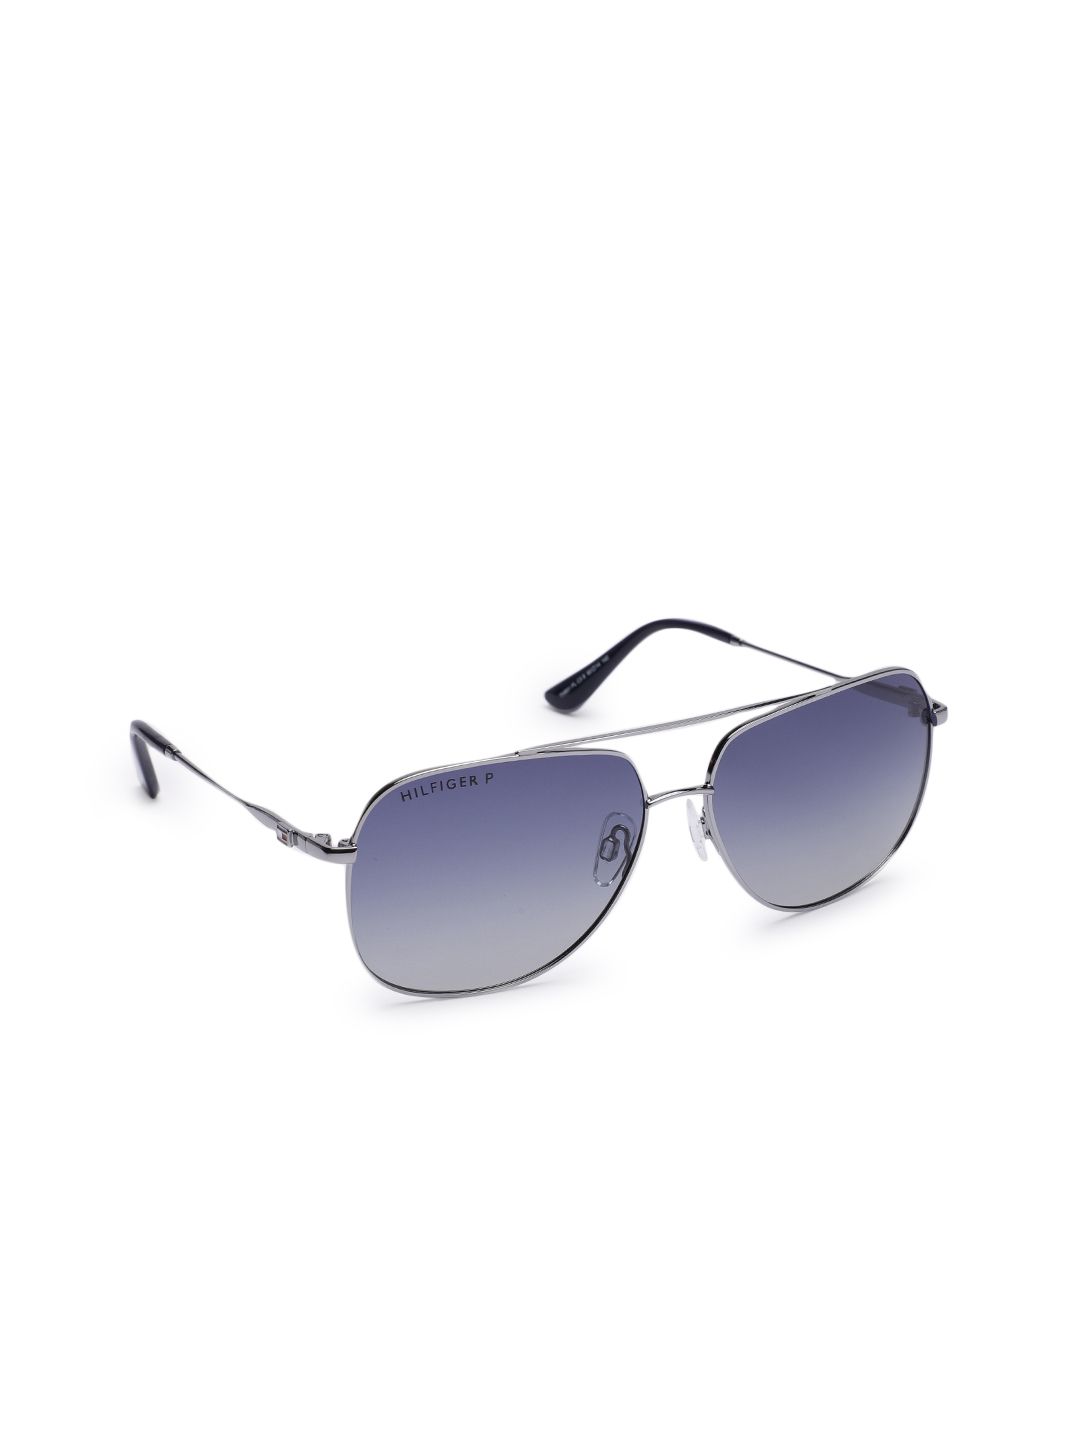 Tommy Hilfiger Unisex Blue & Silver-Toned Aviator Sunglasses Tommy Hilfiger 851 PL C3 S Price in India